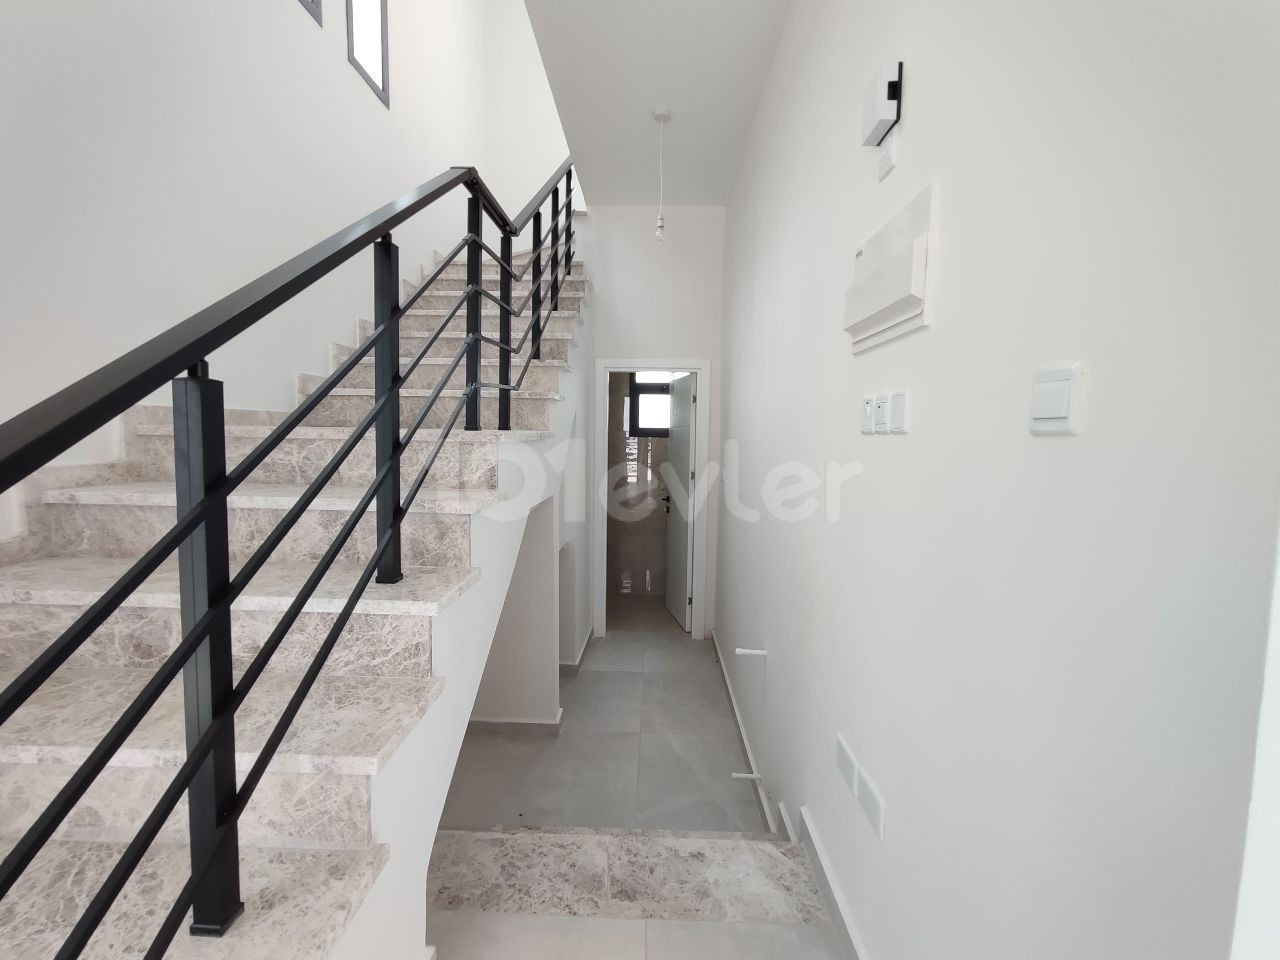 3+1 VILLA WITH PRIVATE POOL AT GIRNE ALSANCAK AT OPPORTUNITY PRICE